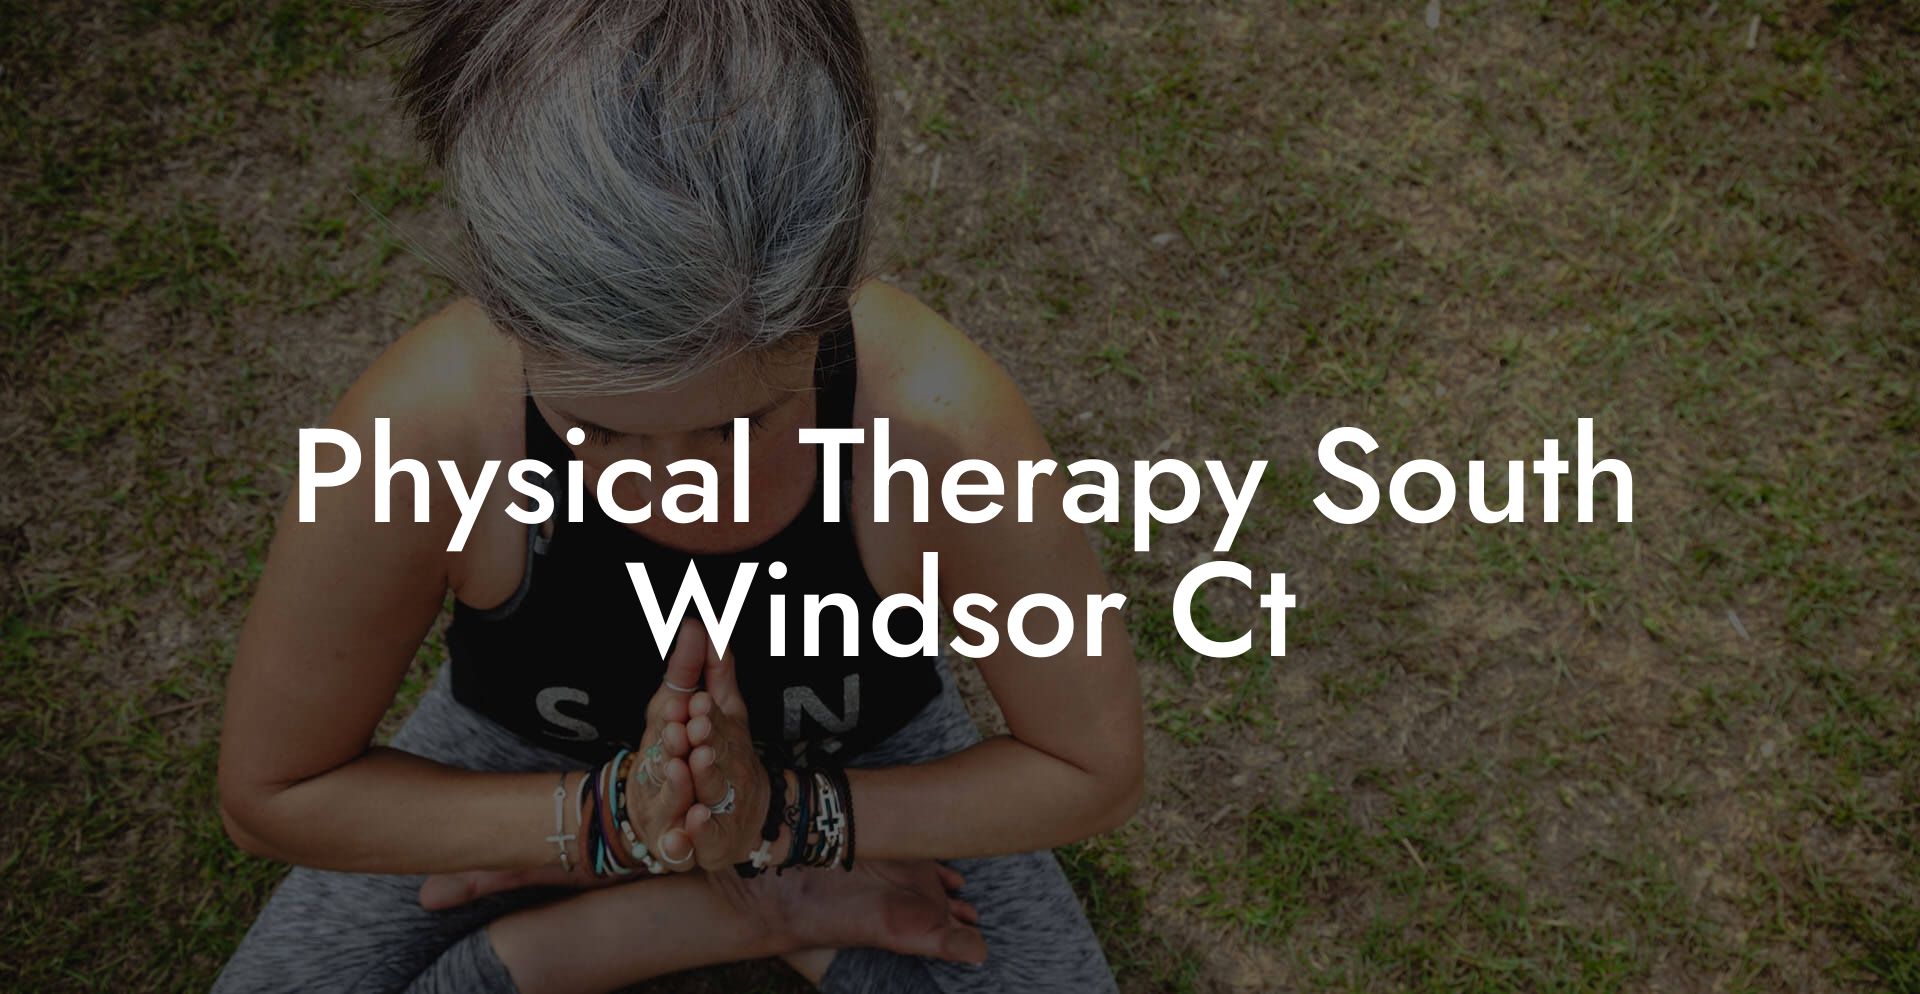 Physical Therapy South Windsor Ct